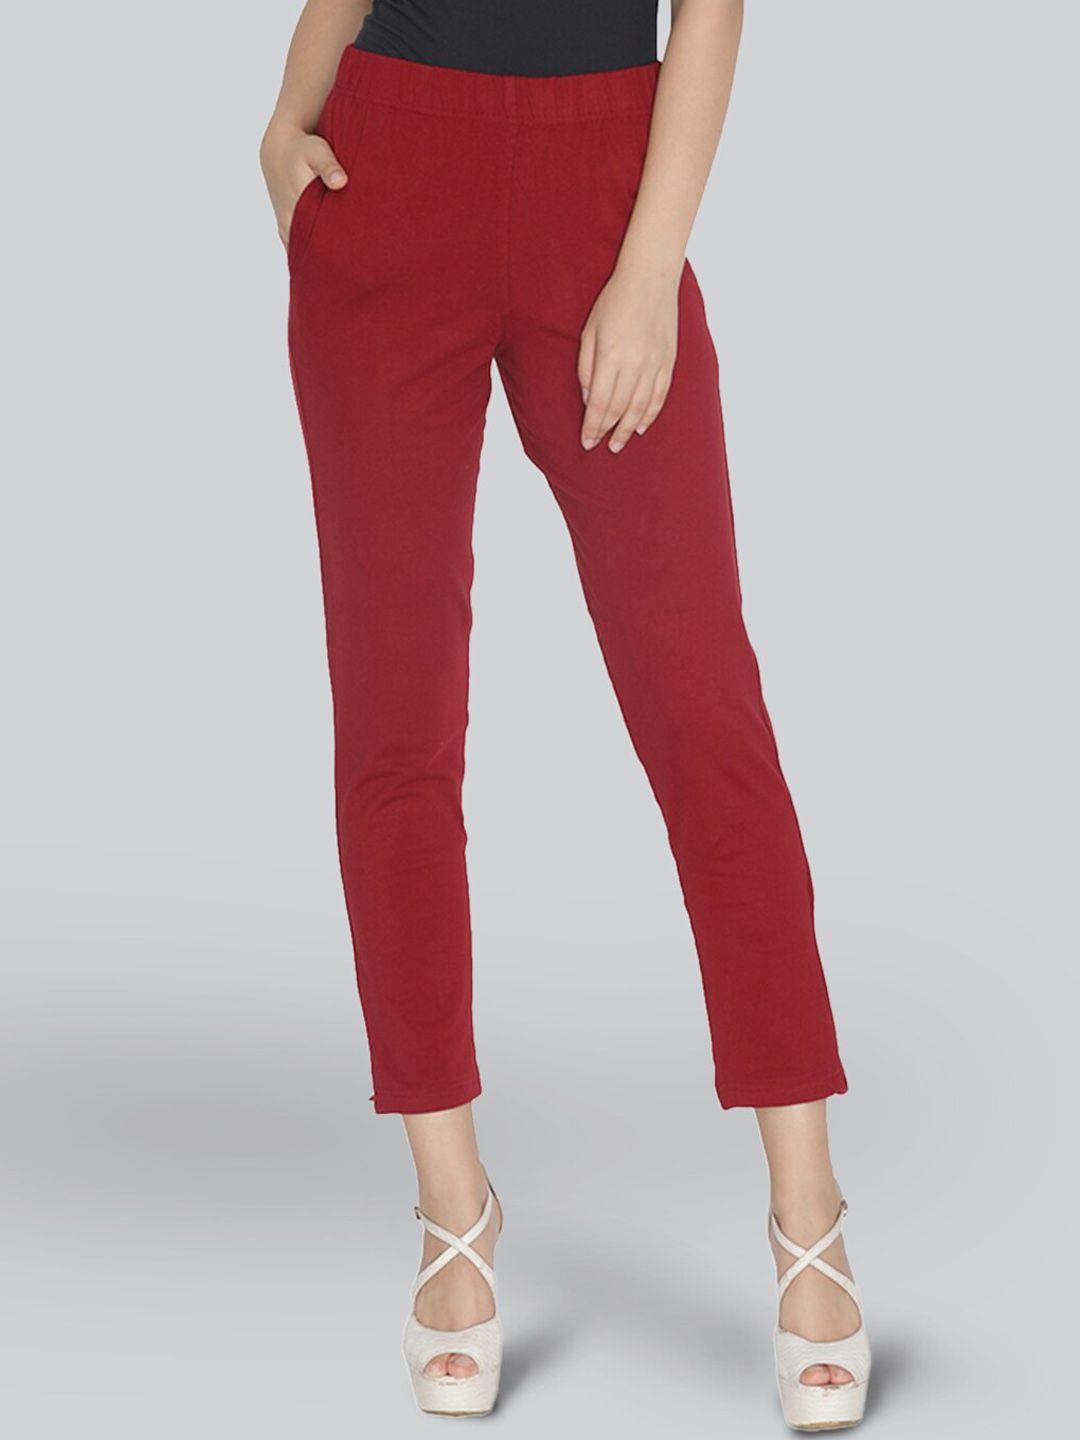 lyra-women-mid-rise-original-fit-knitted-cigarette-trousers